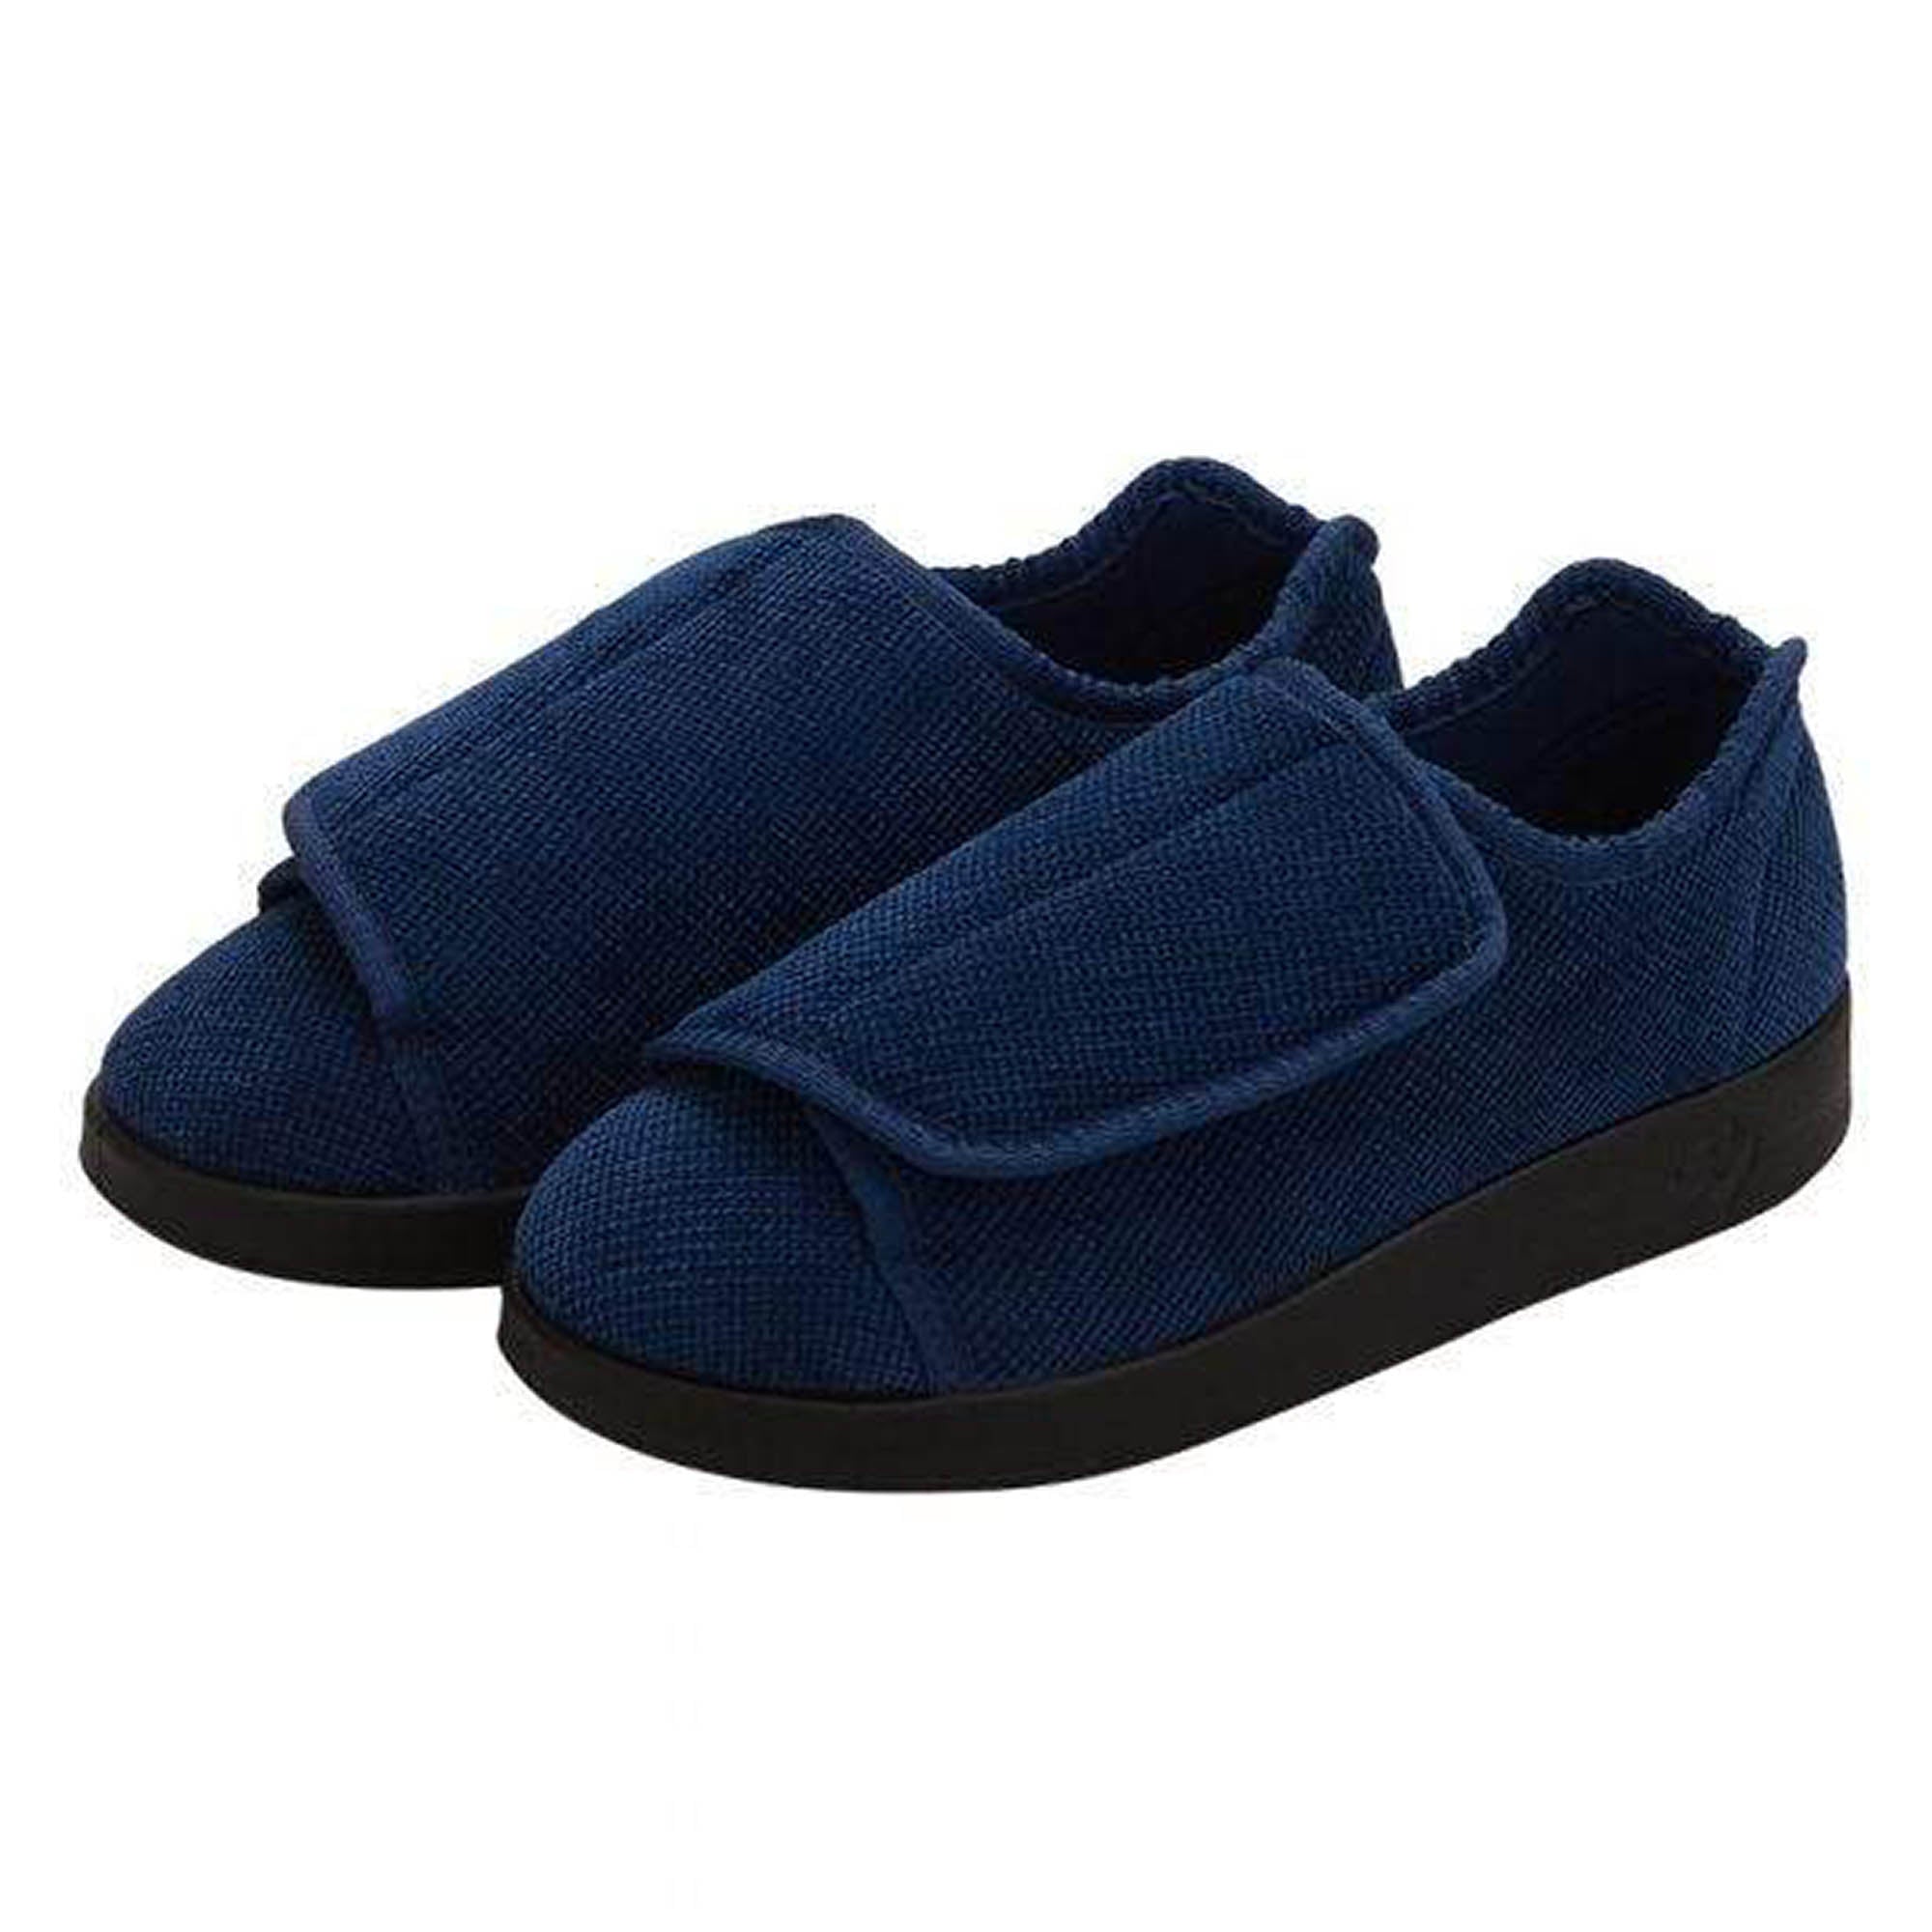 Silverts Women's Antimicrobial Extra Extra Wide Easy-Closure Slippers - Navy - 10